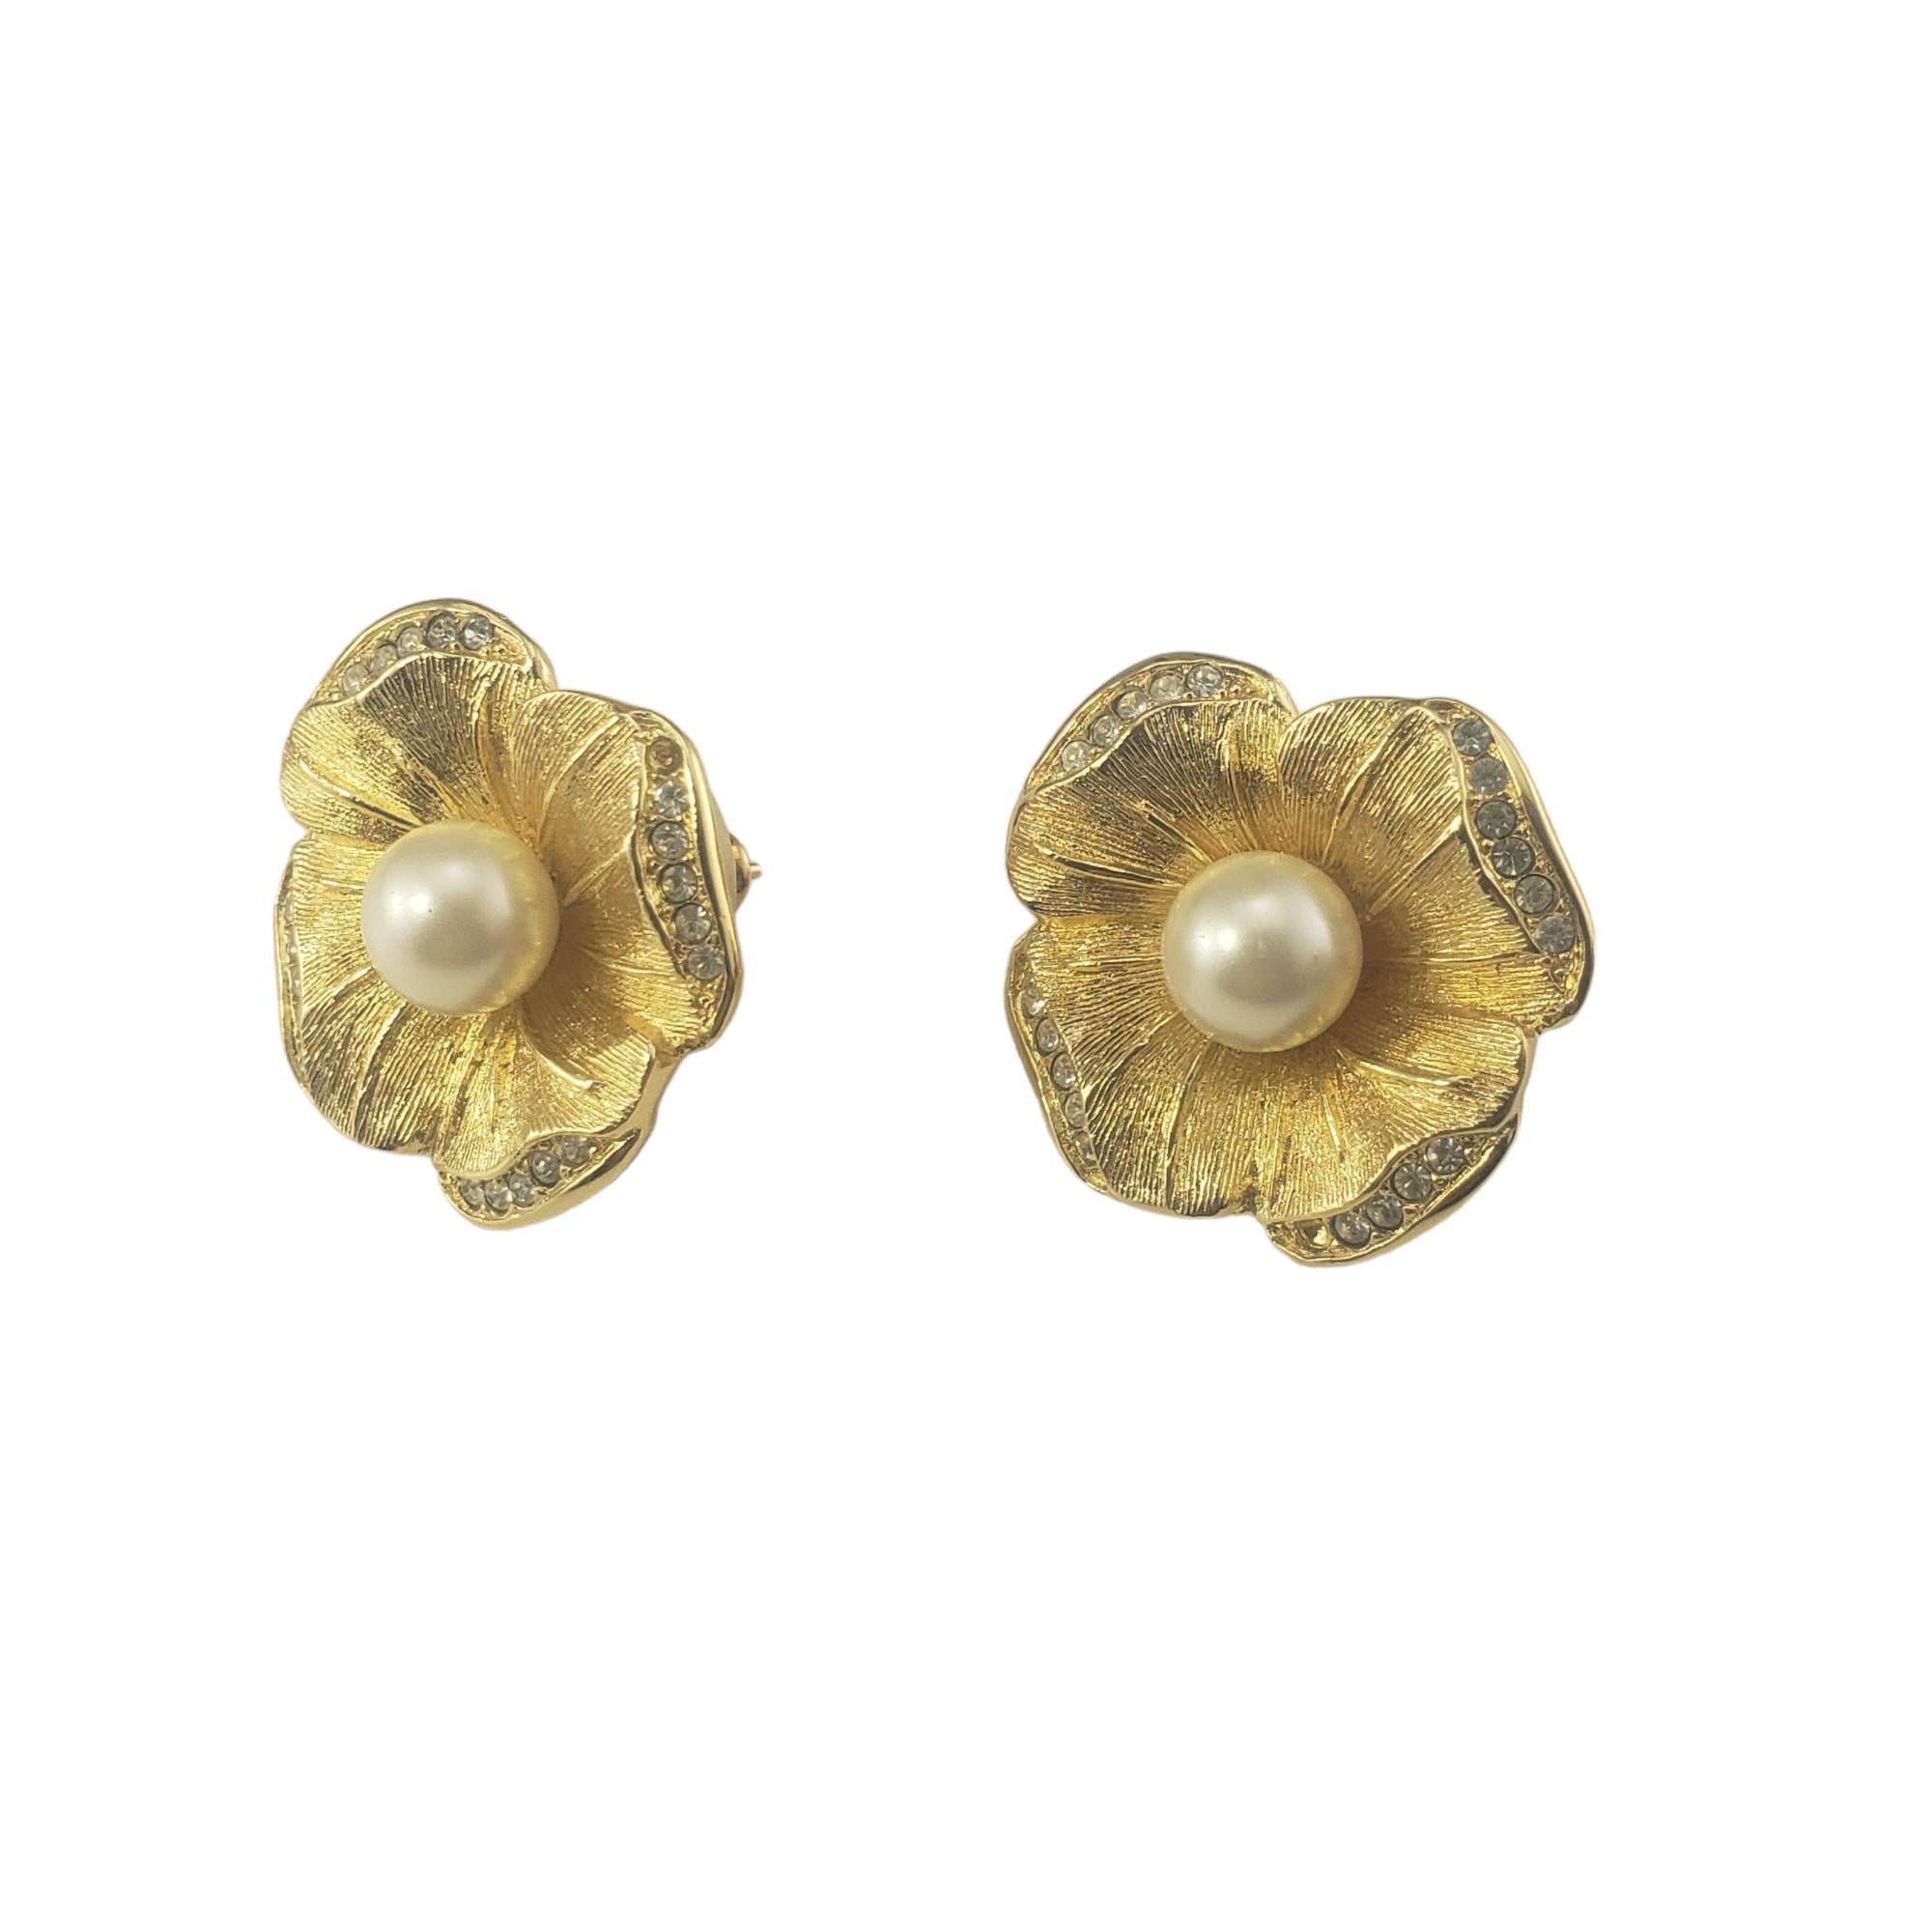 Vintage Christian Dior Flower Earrings-

These elegant flower earrings by Christian Dior each feature one faux pearl and sparkling crystals.  Push back closures.

Size: 25 mm

Hallmark:  Chr.Dior

Weight: 7.7 dwt./ 12.0 gr.

Very good condition,